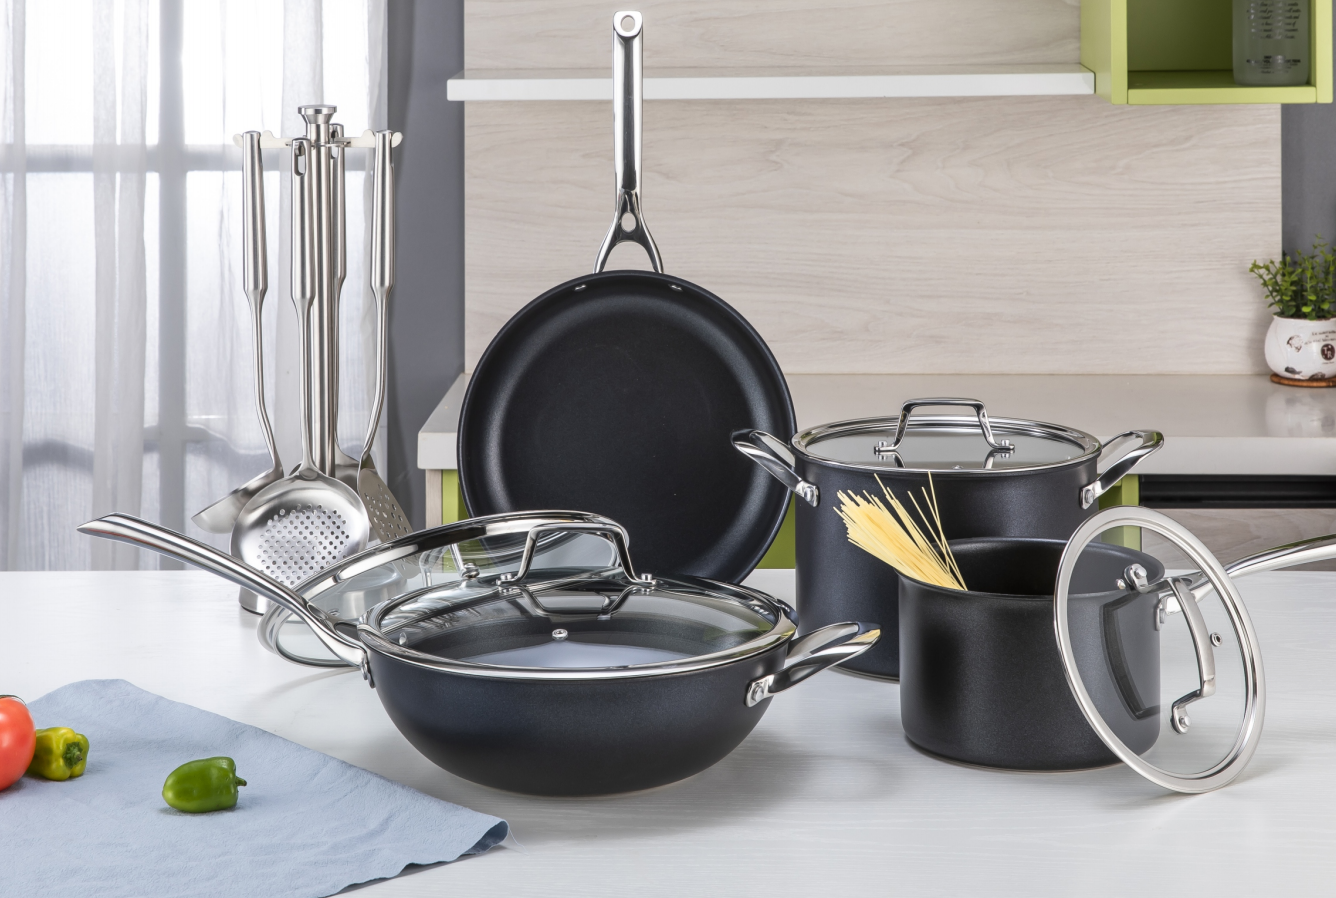 The perfect pots and pans for your kitchen